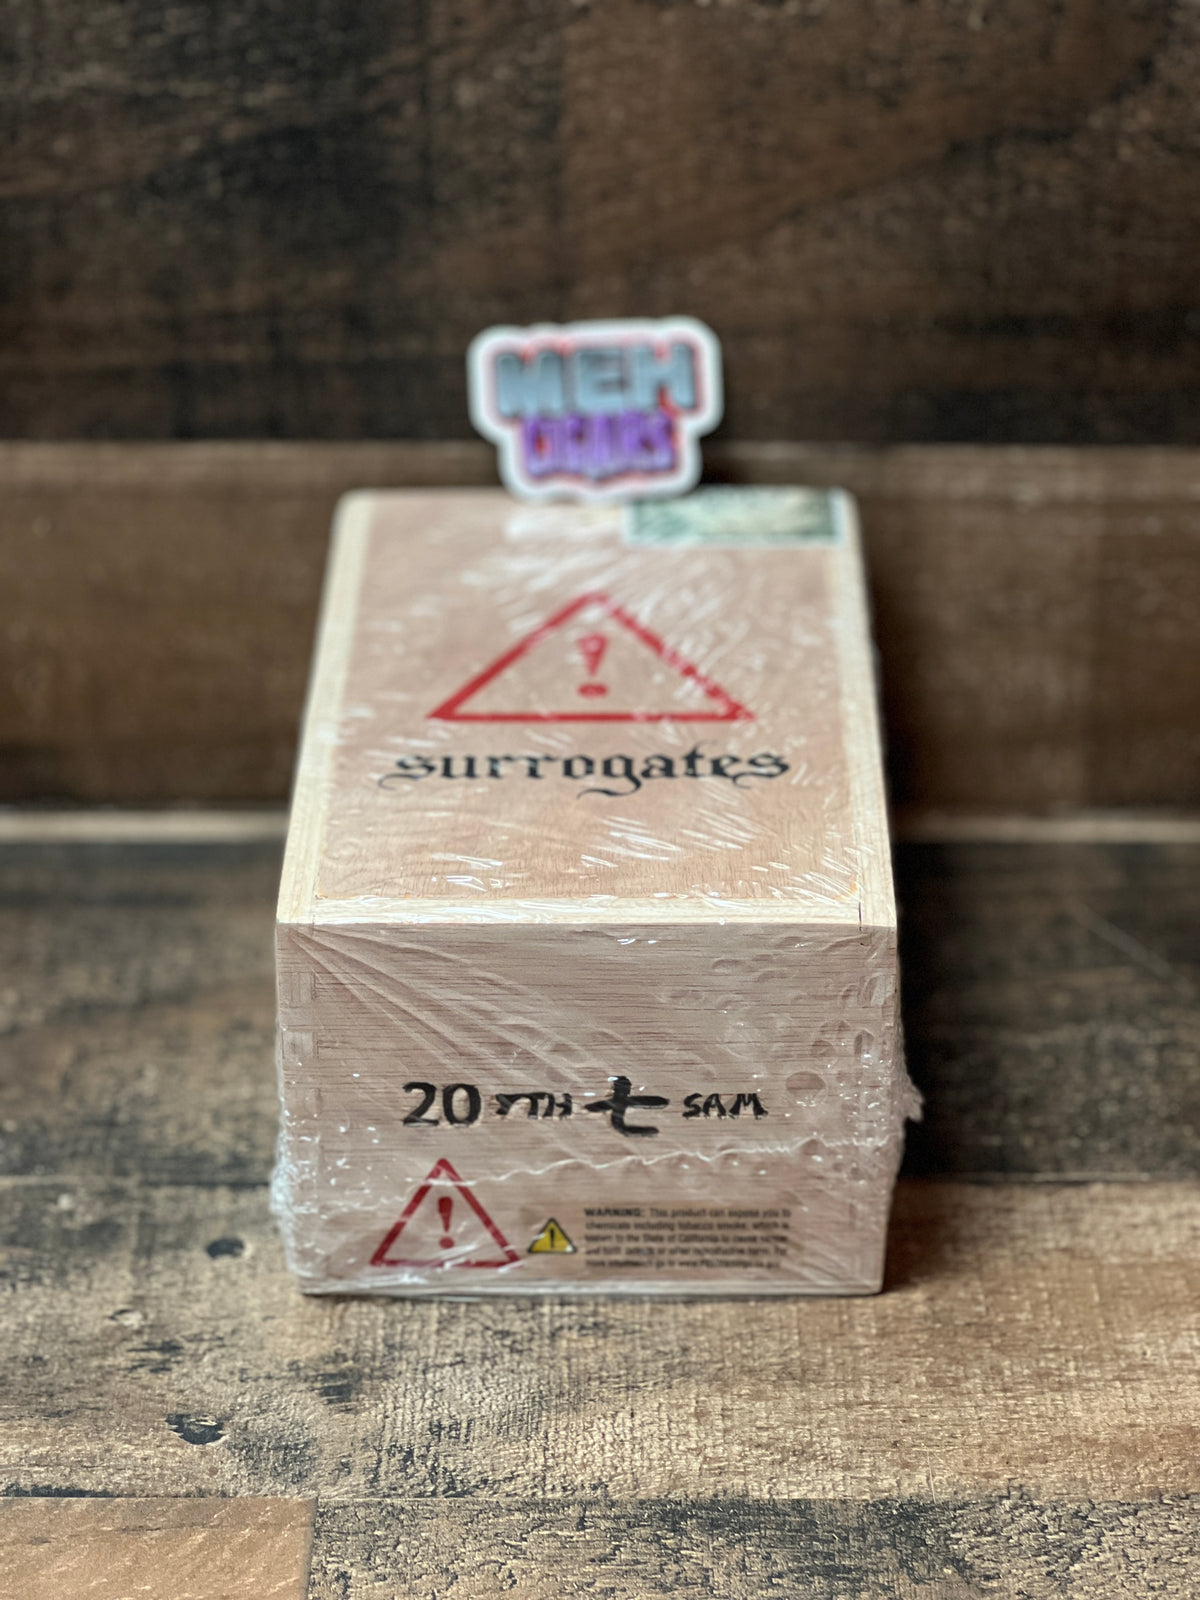 Surrogates 7th Sam by L'Atelier Imports bx of 20